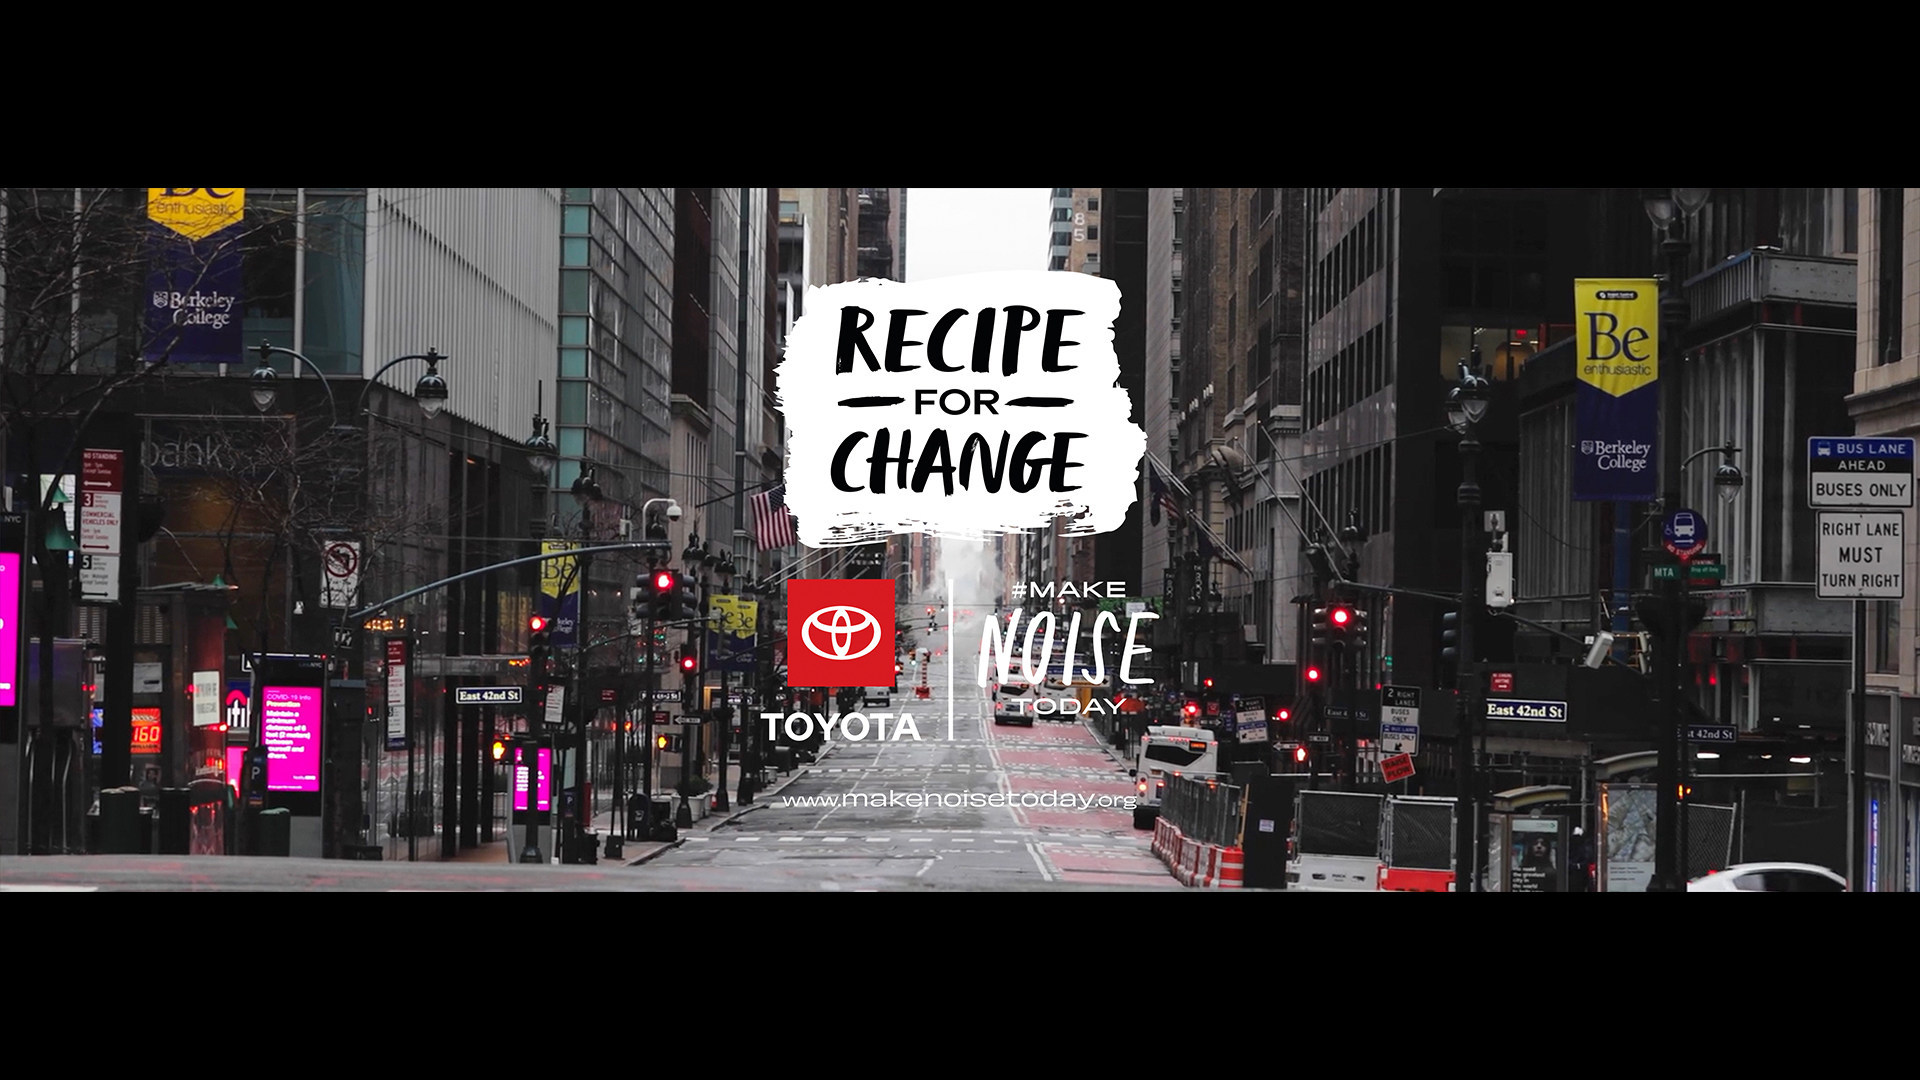 Make Noise Today: Recipe for Change notable chefs bring food to older adults, essential workers, and others impacted by COVID-19 in New York, Los Angeles, and San Francisco.